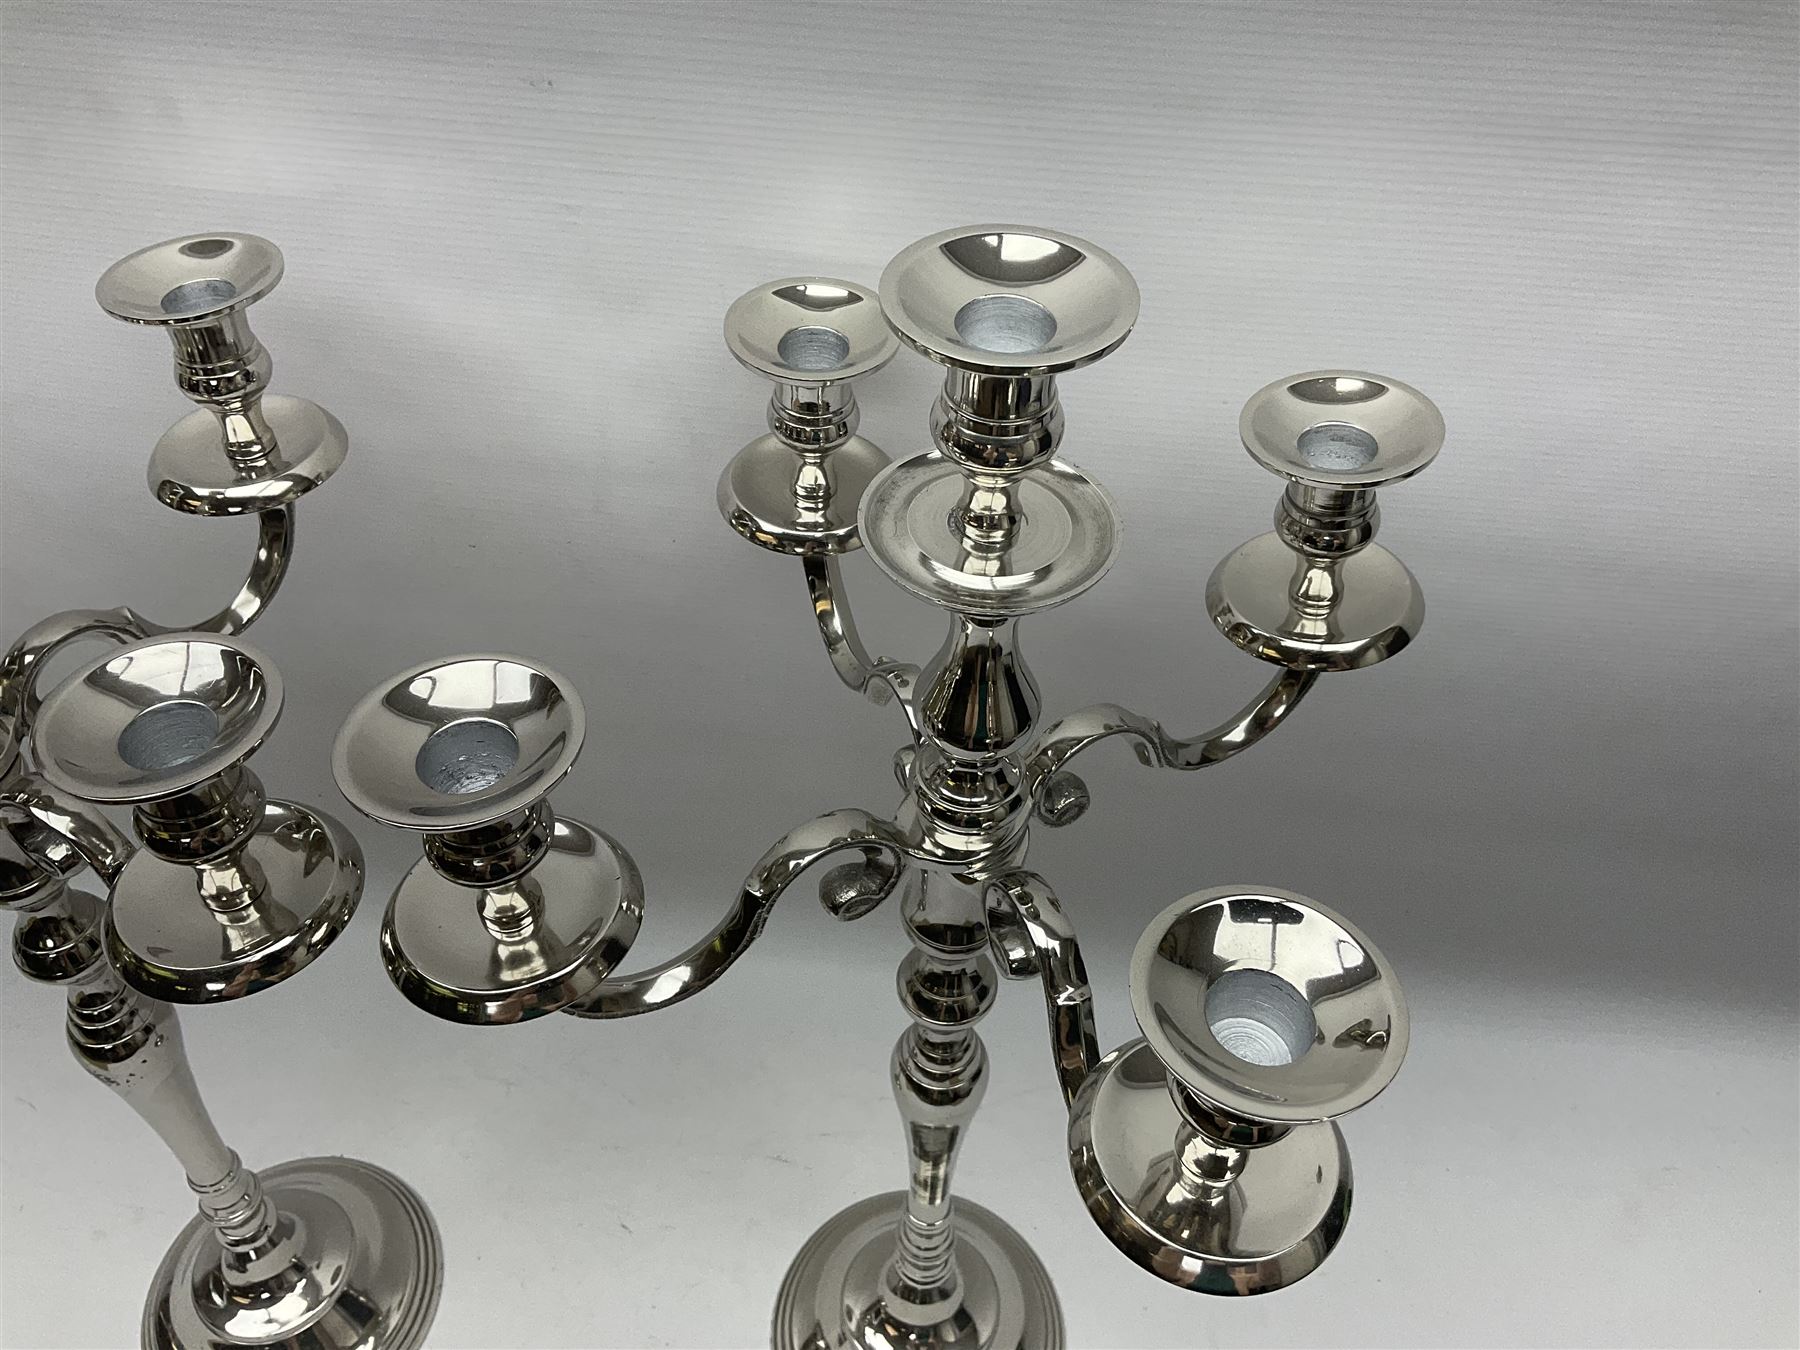 Pair of four branch candelabras - Image 5 of 7